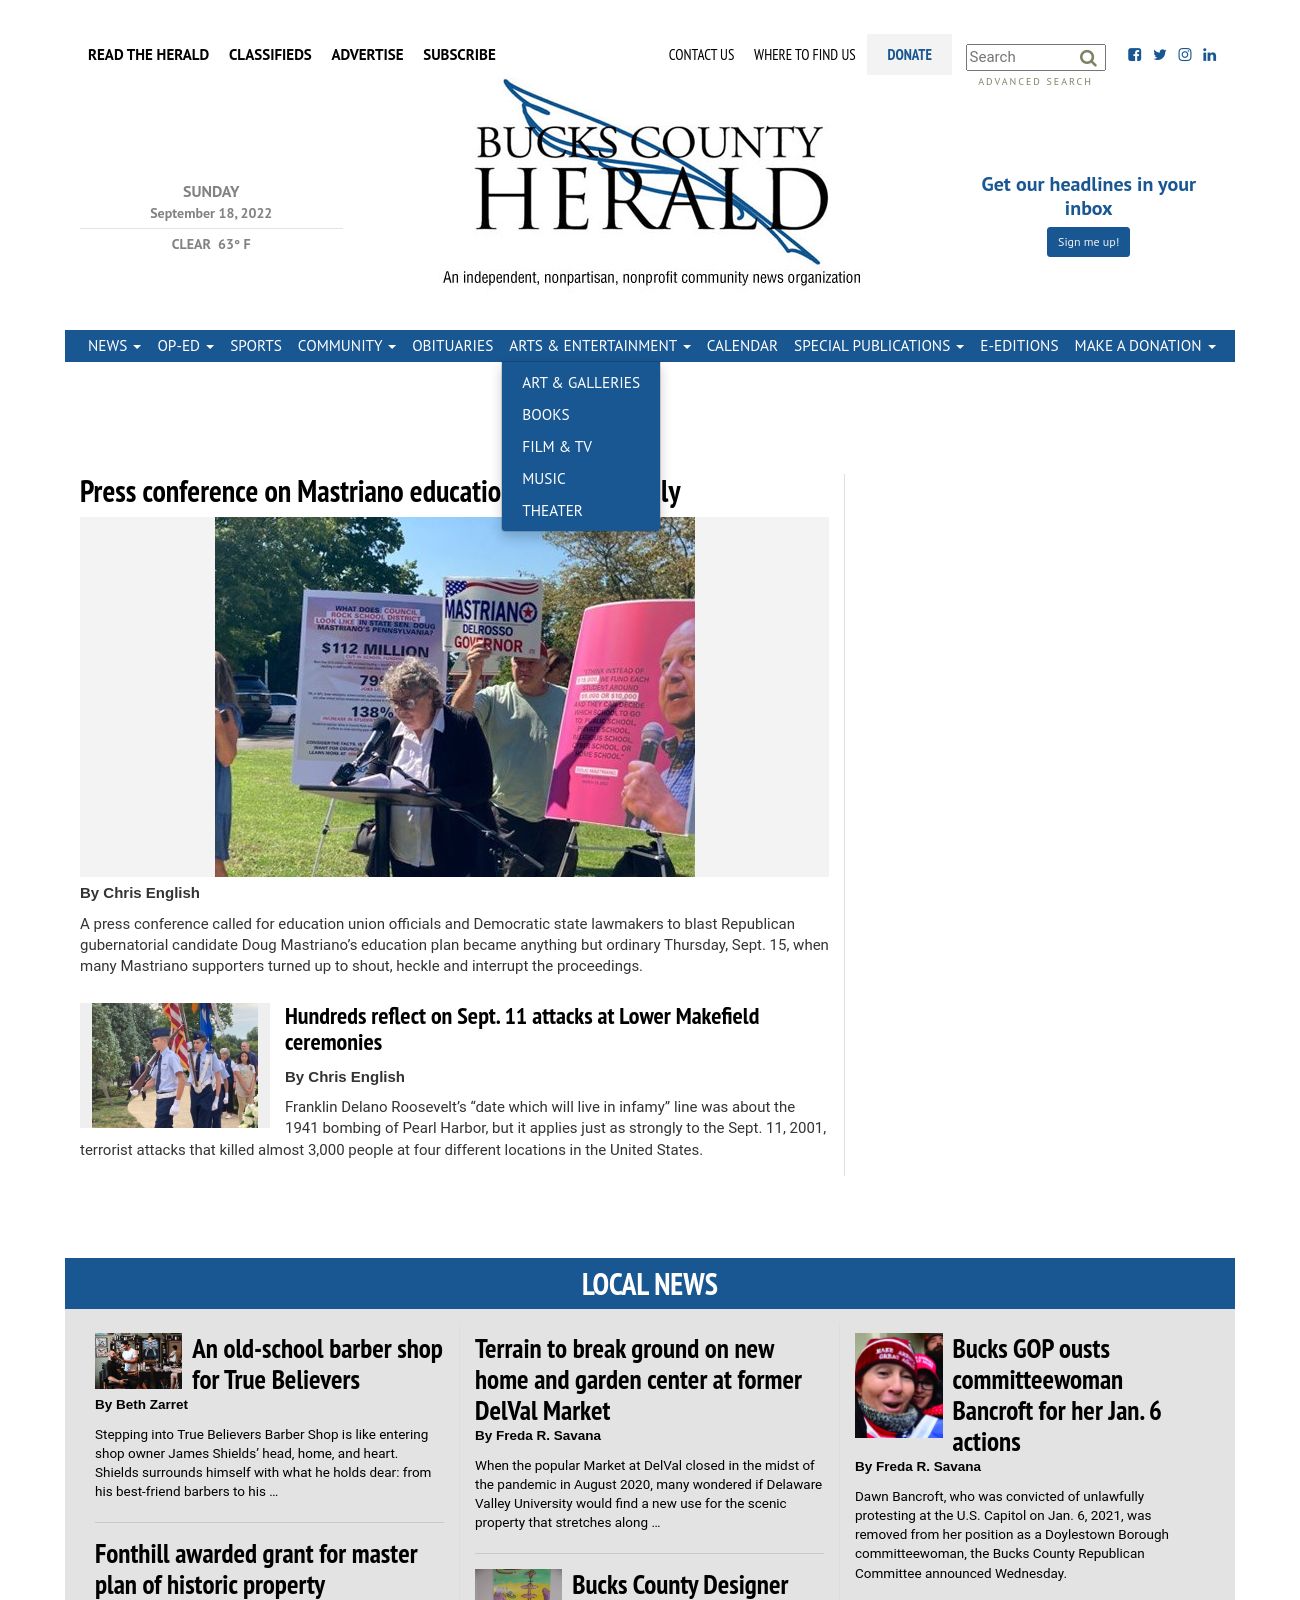 Bucks County Herald at 2022-09-18 06:53:23-04:00 local time